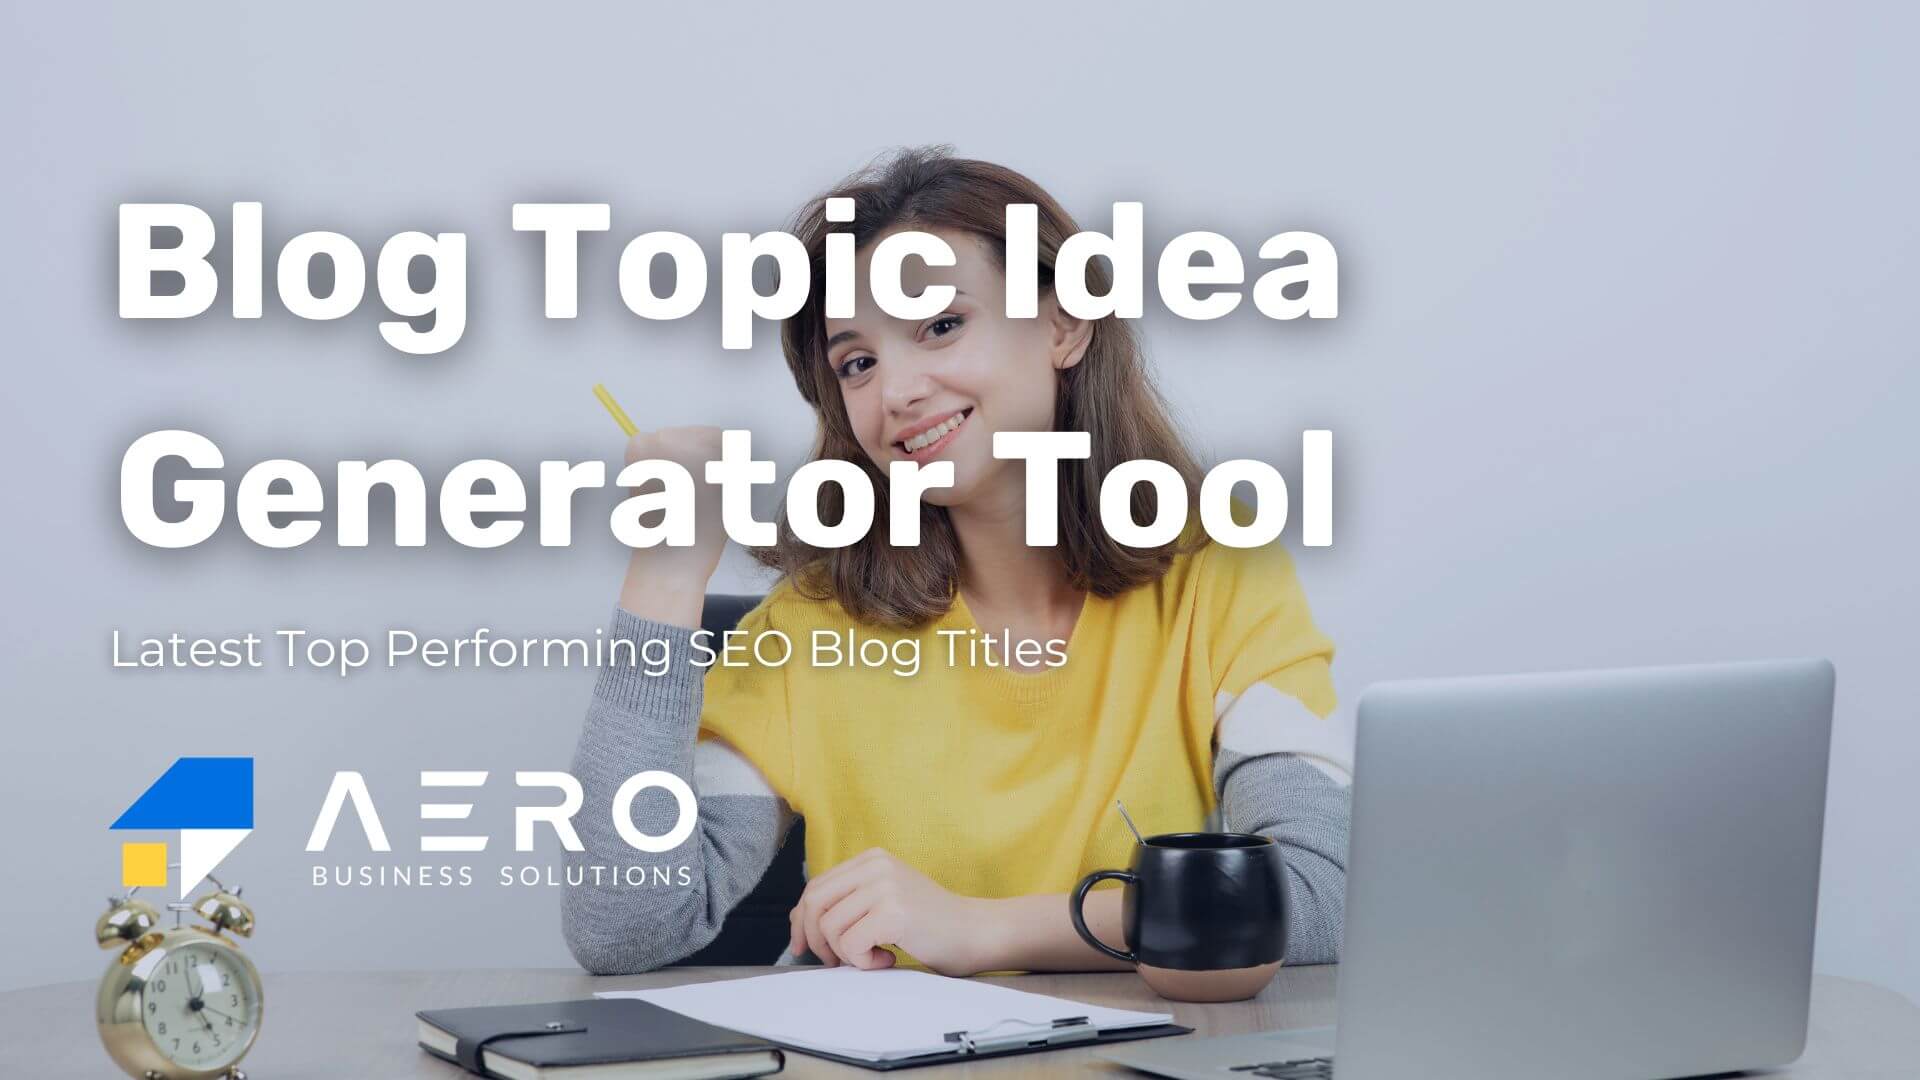 SEO Blog Idea Topic Generator Tool - Maximize Organic Traffic with Engaging Titles - An illustrative depiction of the SEO Blog Idea Topic Generator Tool in action, showcasing the user interface with fields to input topic keywords and generate SEO-optimized blog titles. The tool offers a seamless solution to overcome writer's block, generate captivating blog titles, and boost organic traffic through content marketing and blogging efforts. Stay updated with evolving SEO trends and stay ahead in the digital landscape with this invaluable tool.